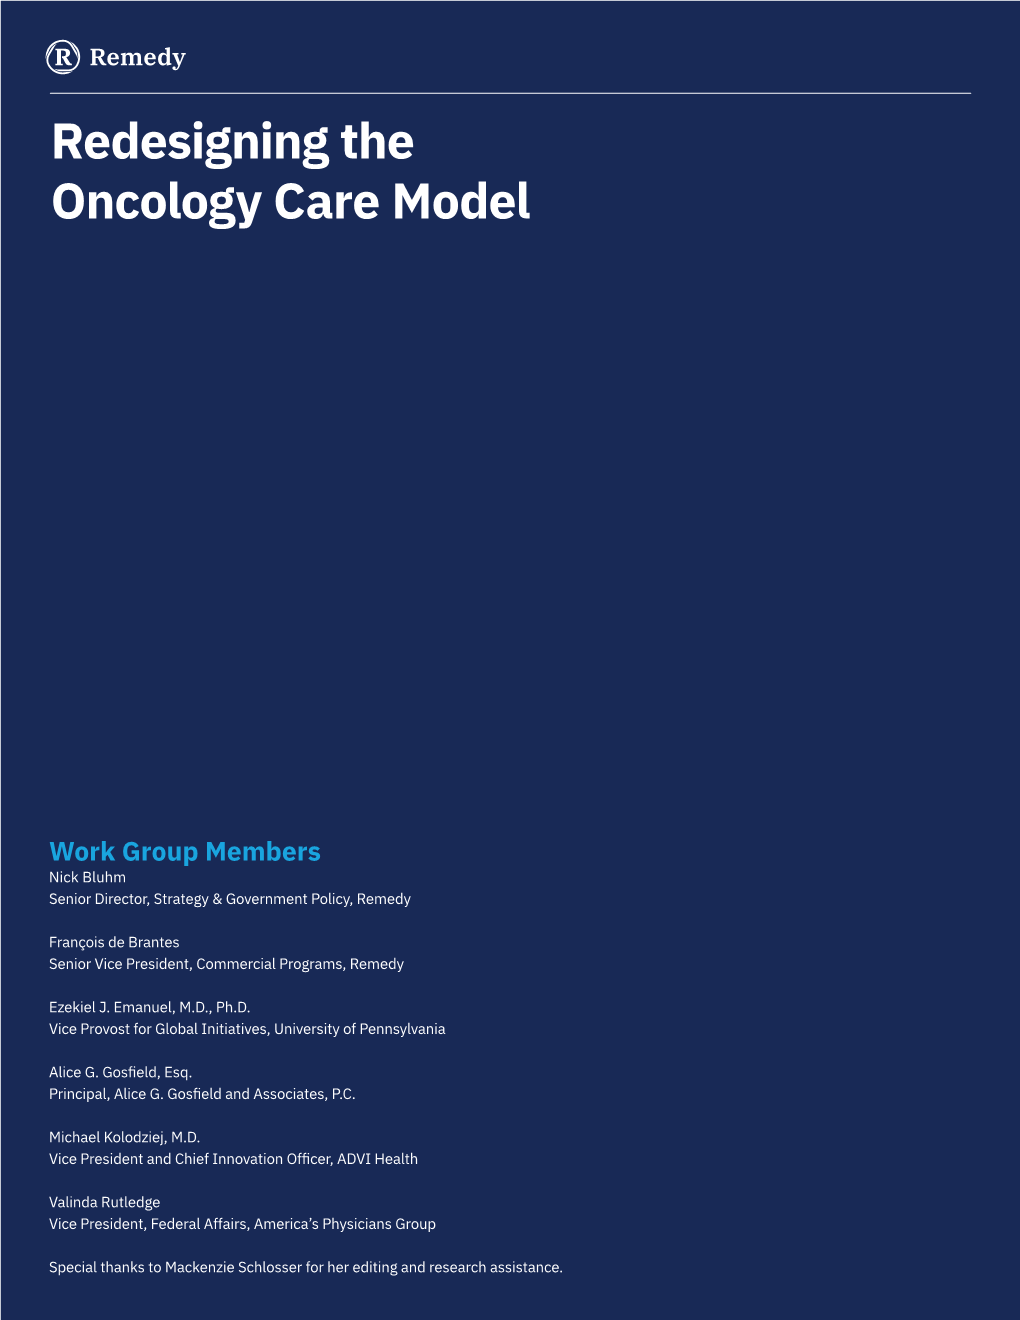 Redesigning the Oncology Care Model